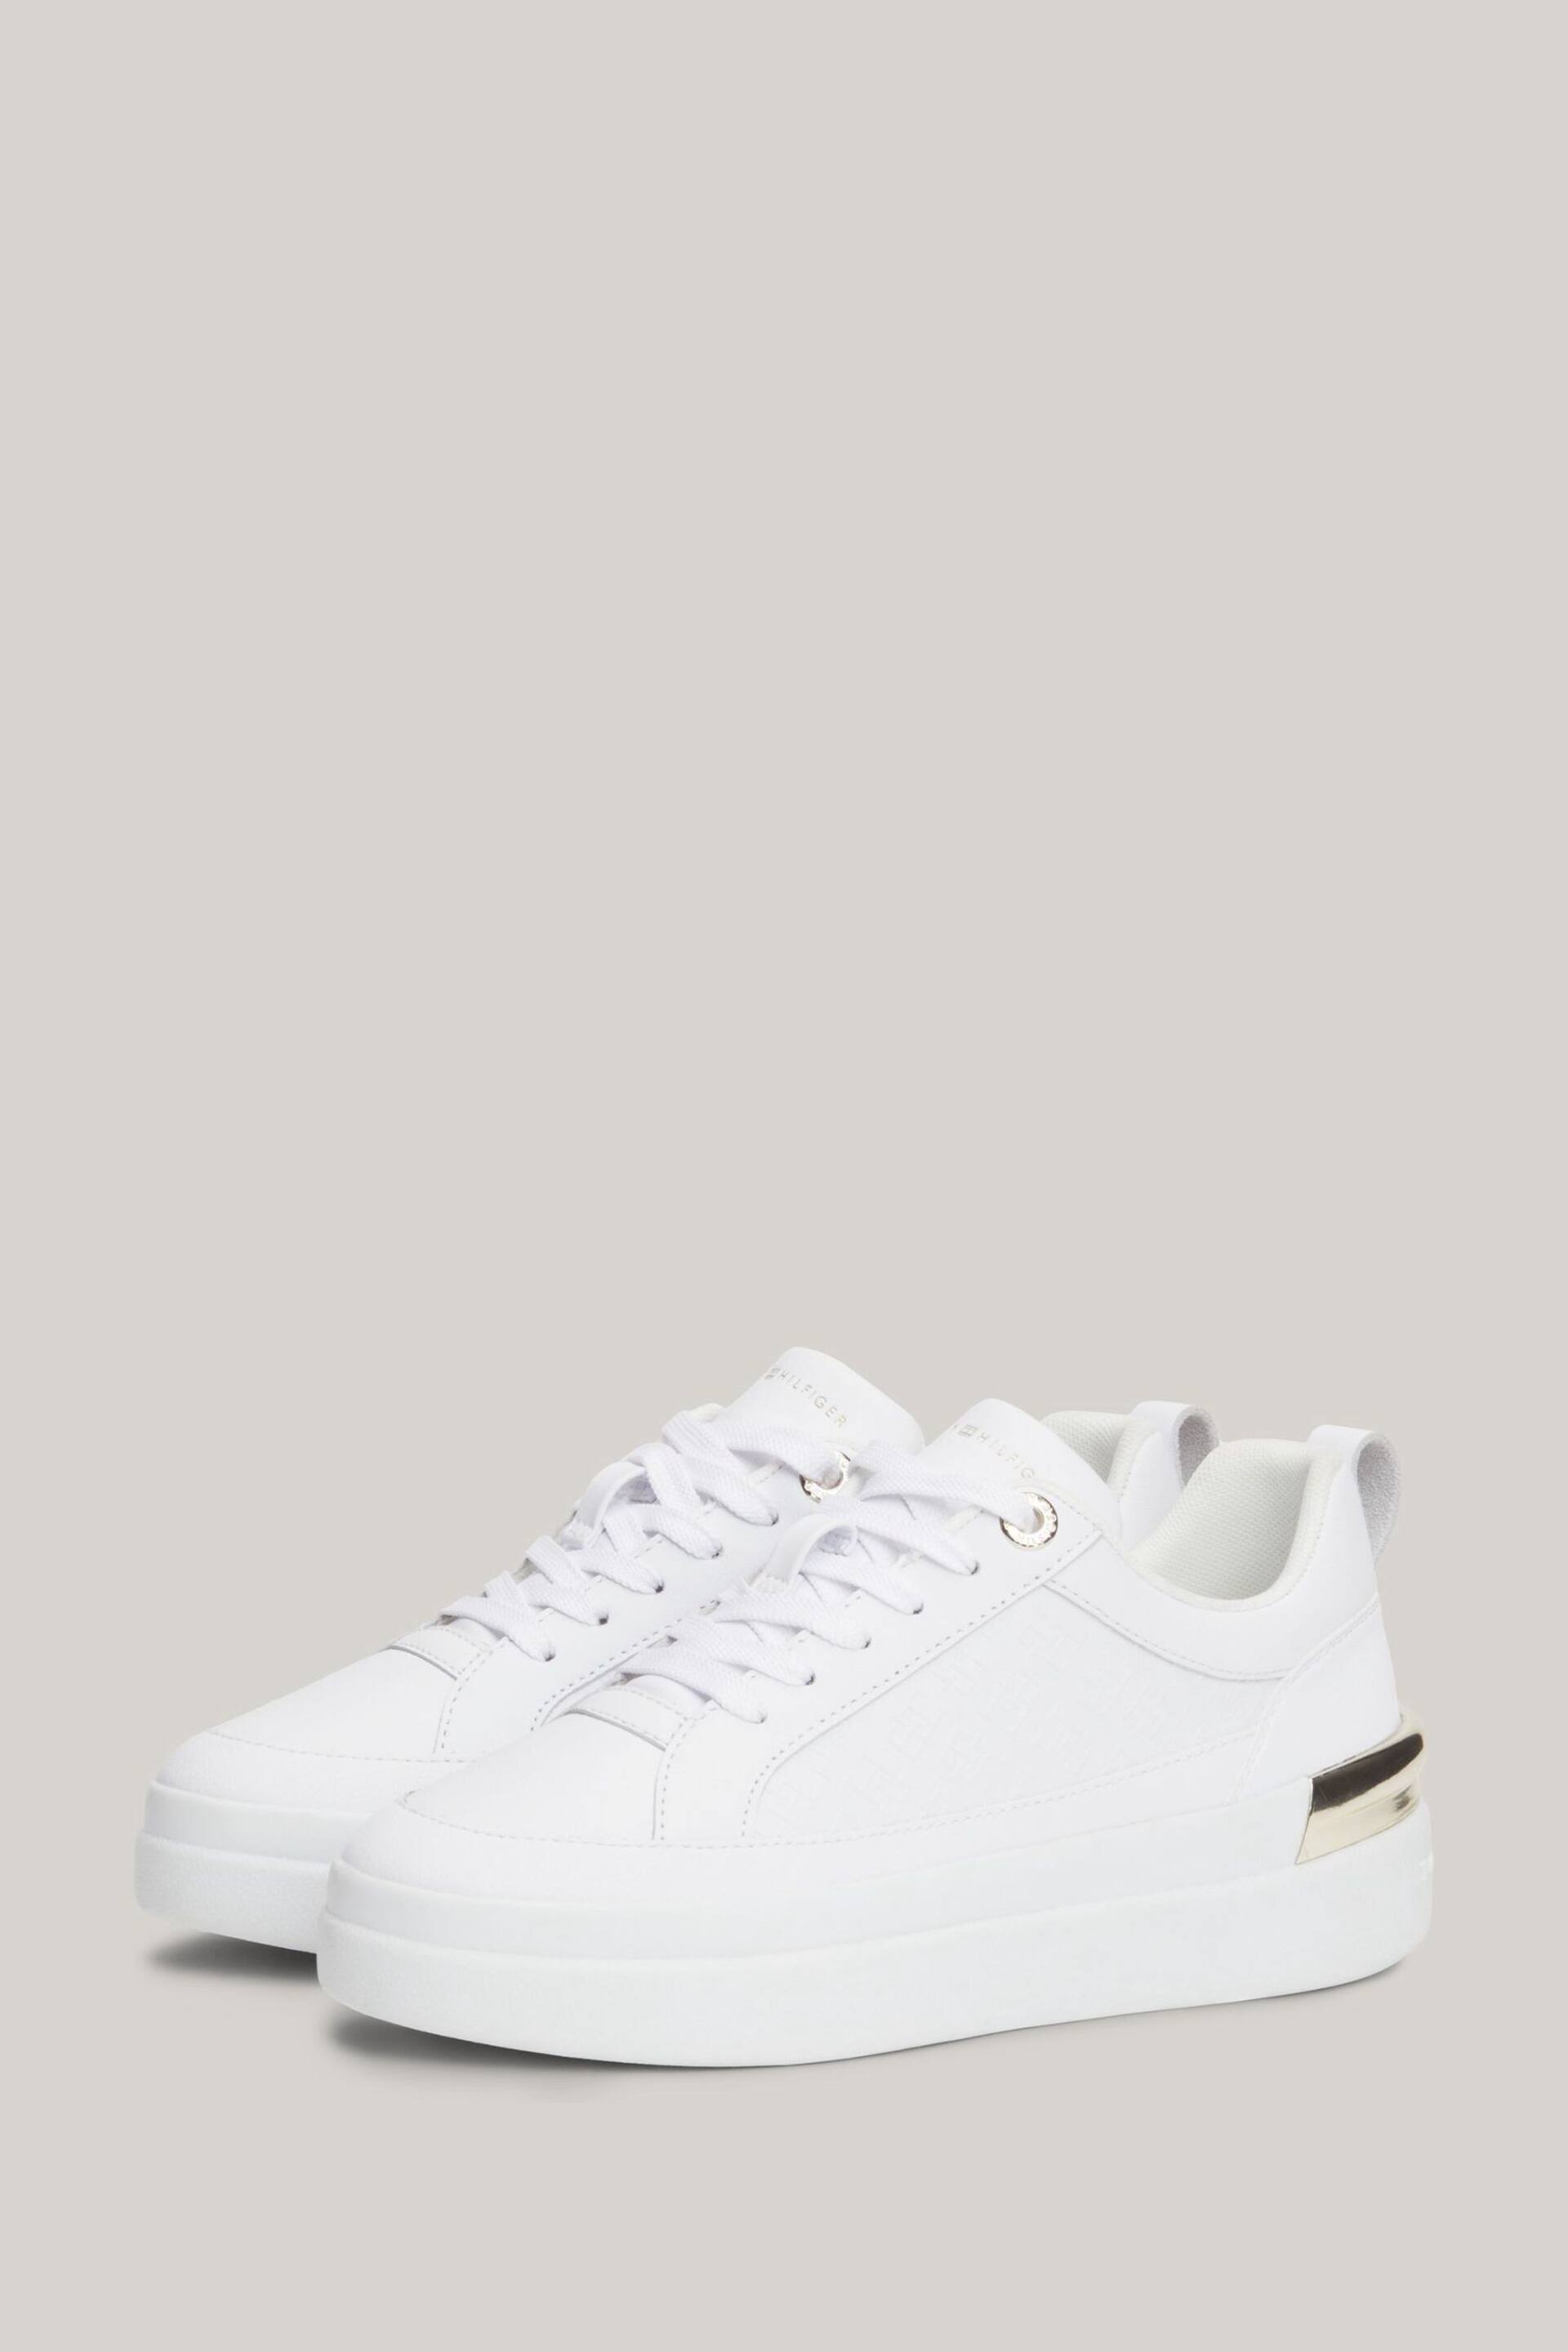 Tommy Hilfiger Lux Court White Sneakers - Image 2 of 5